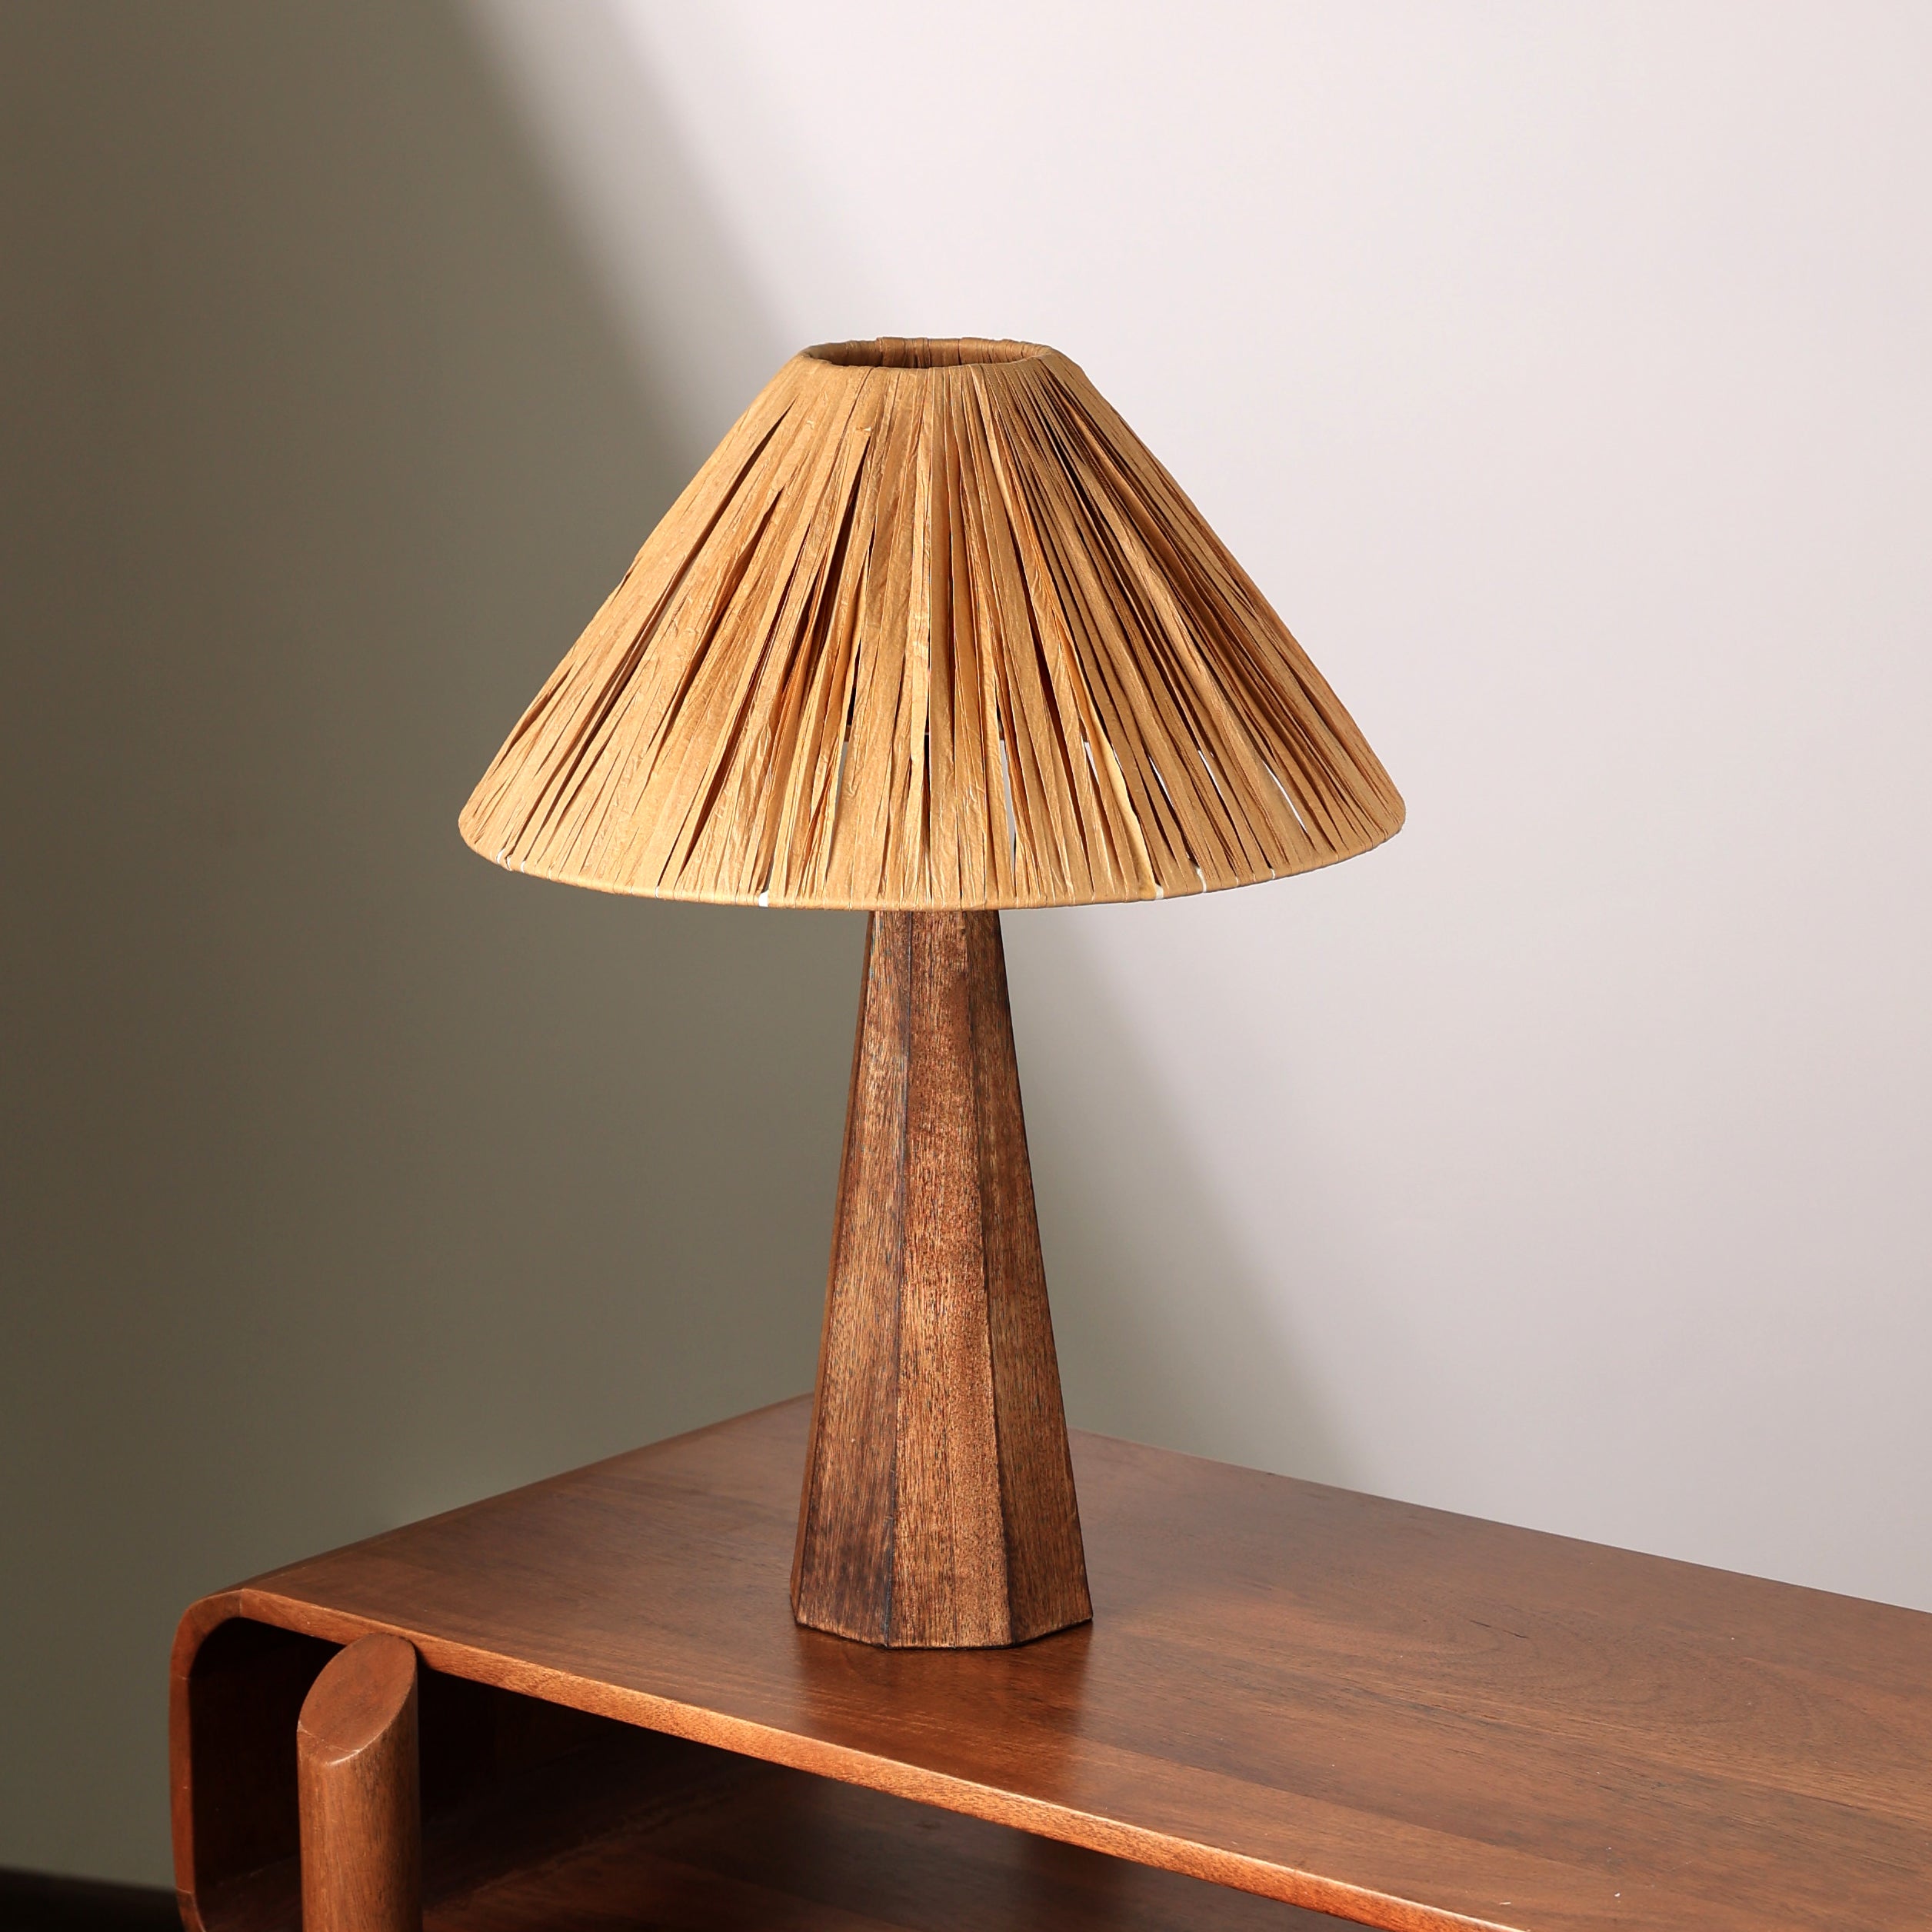 Harmony Table Lamp - Raffia, Natural Wood, Perfect for Earthy Spaces